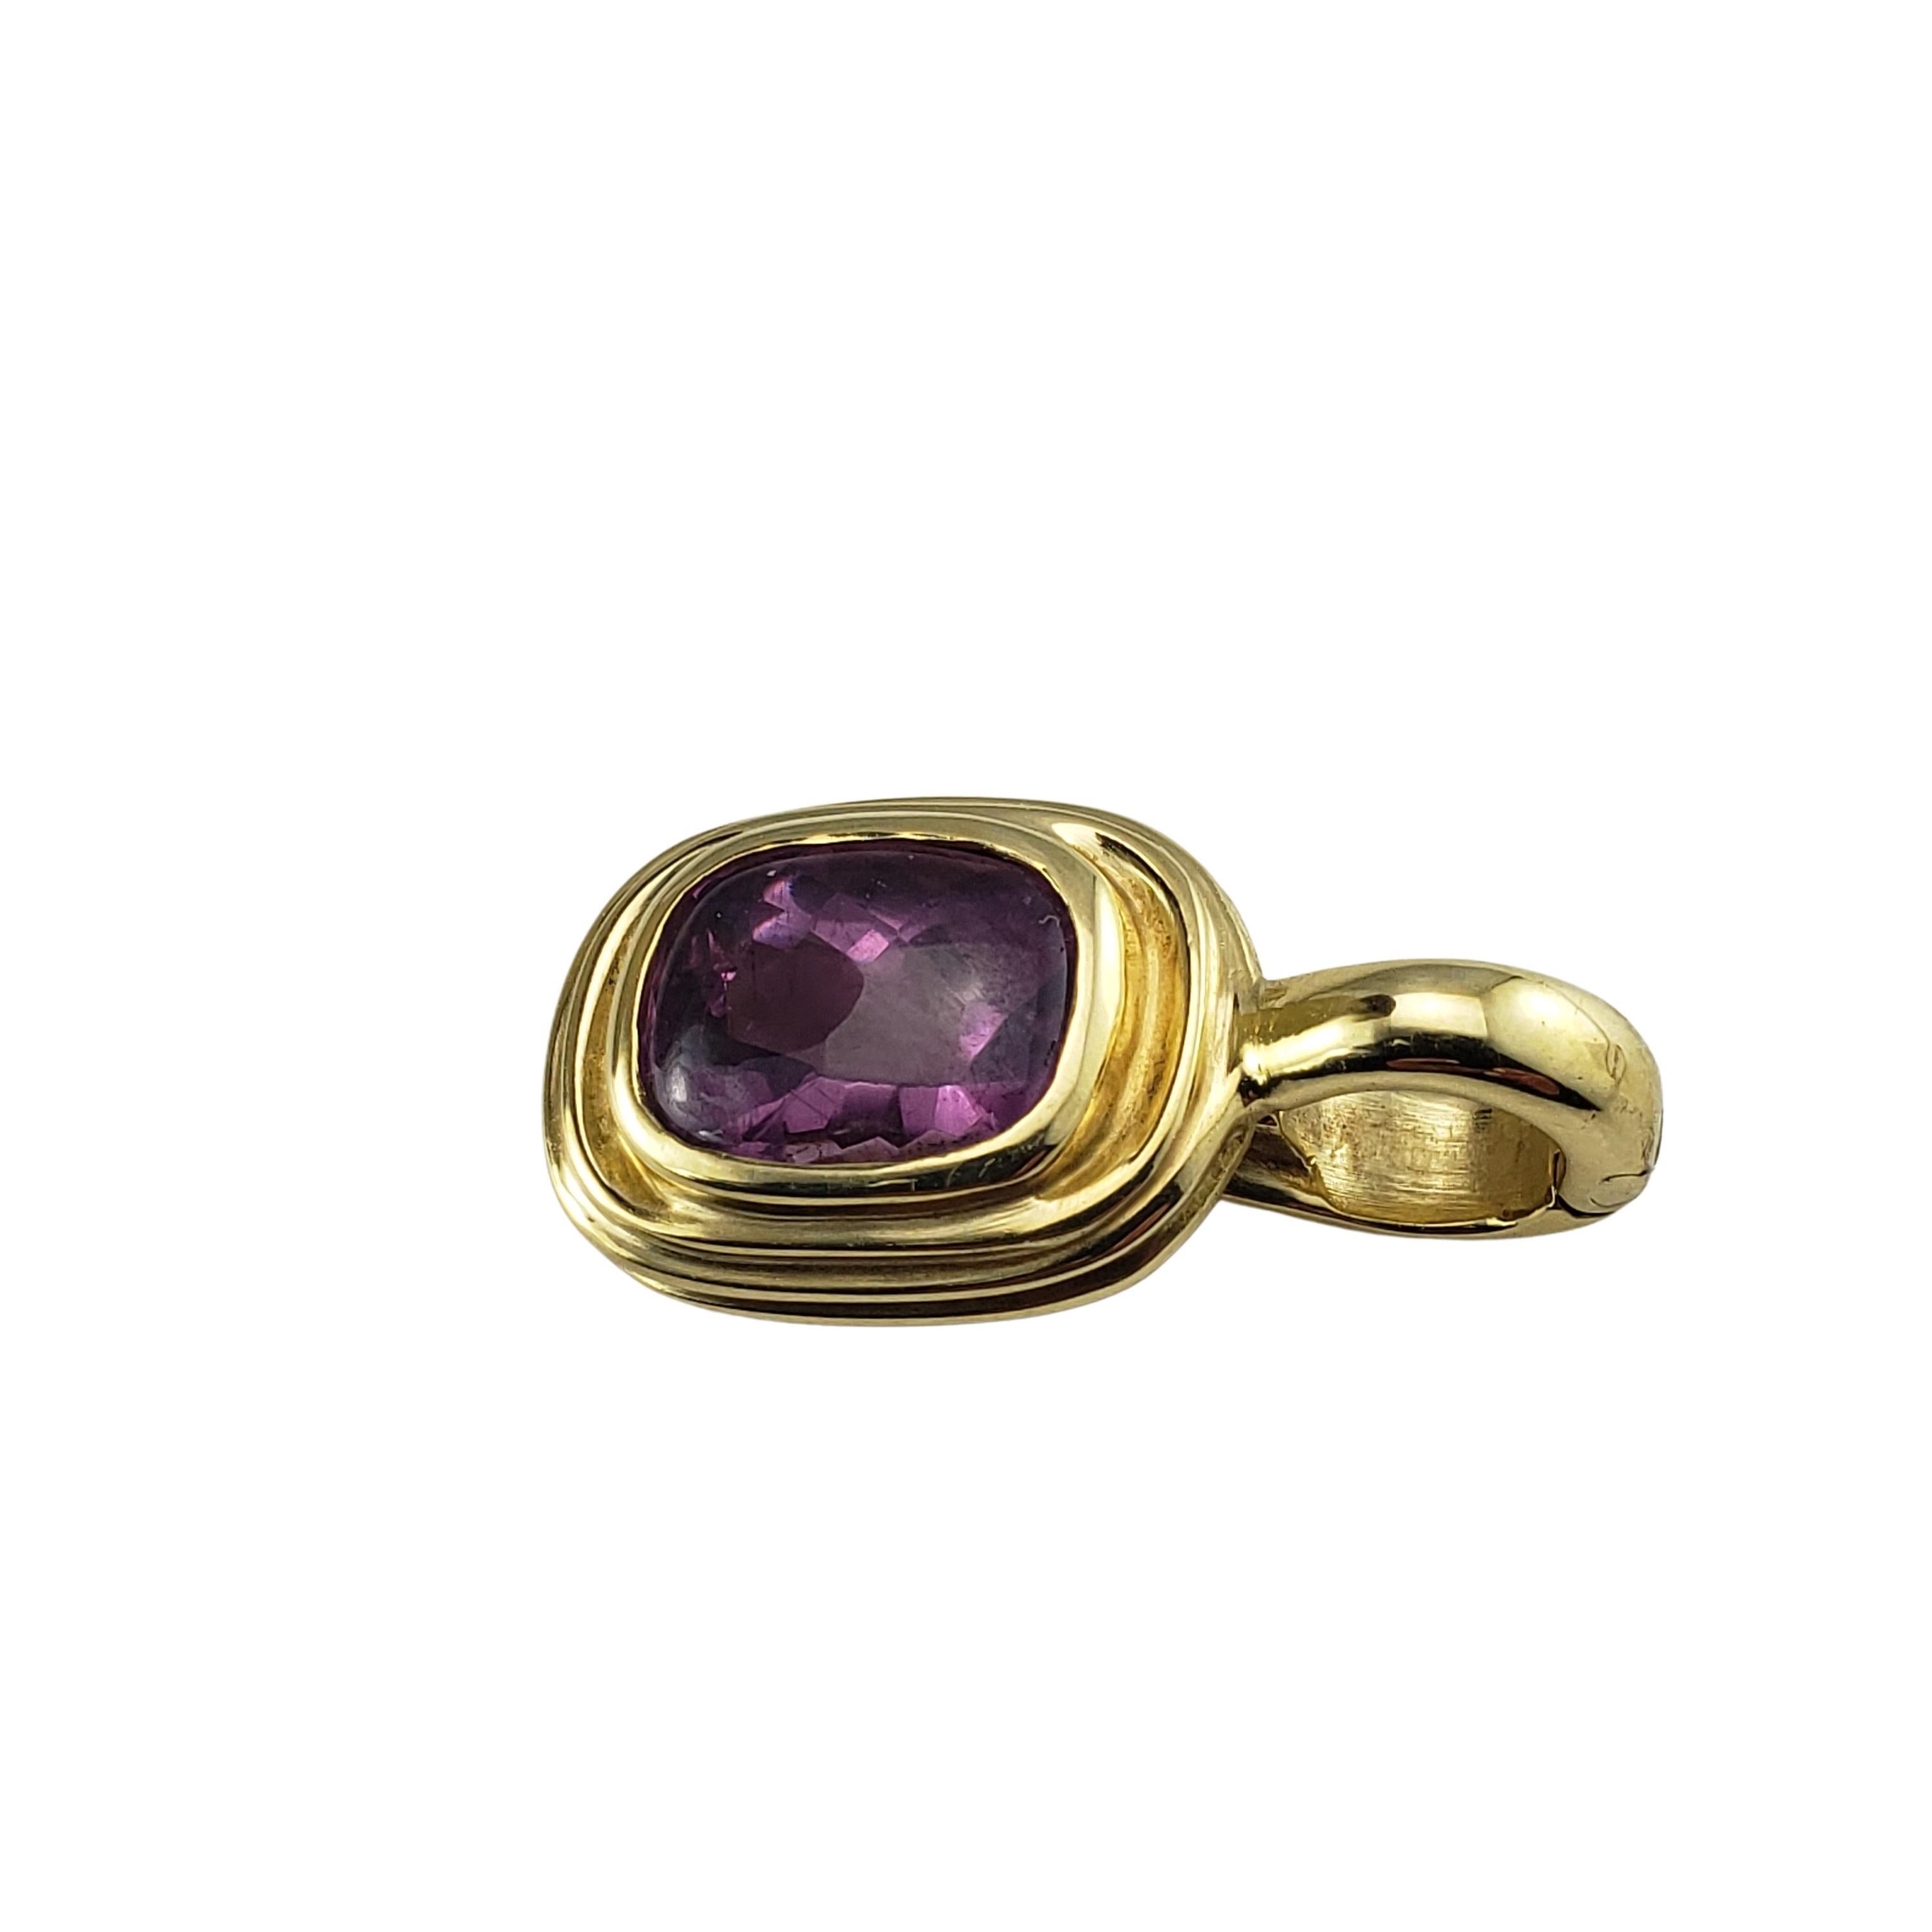 Slane & Slane 18 Karat Yellow Gold and Amethyst Pendant-

This lovely pendant features one amethyst gemstone (10 mm x 8 mm) set in beautifully detailed 18K yellow gold.

Size: 25 mm x 13 mm

Weight:  5.8 dwt. /  9.1 gr.

Hallmark:  750  SS

Very